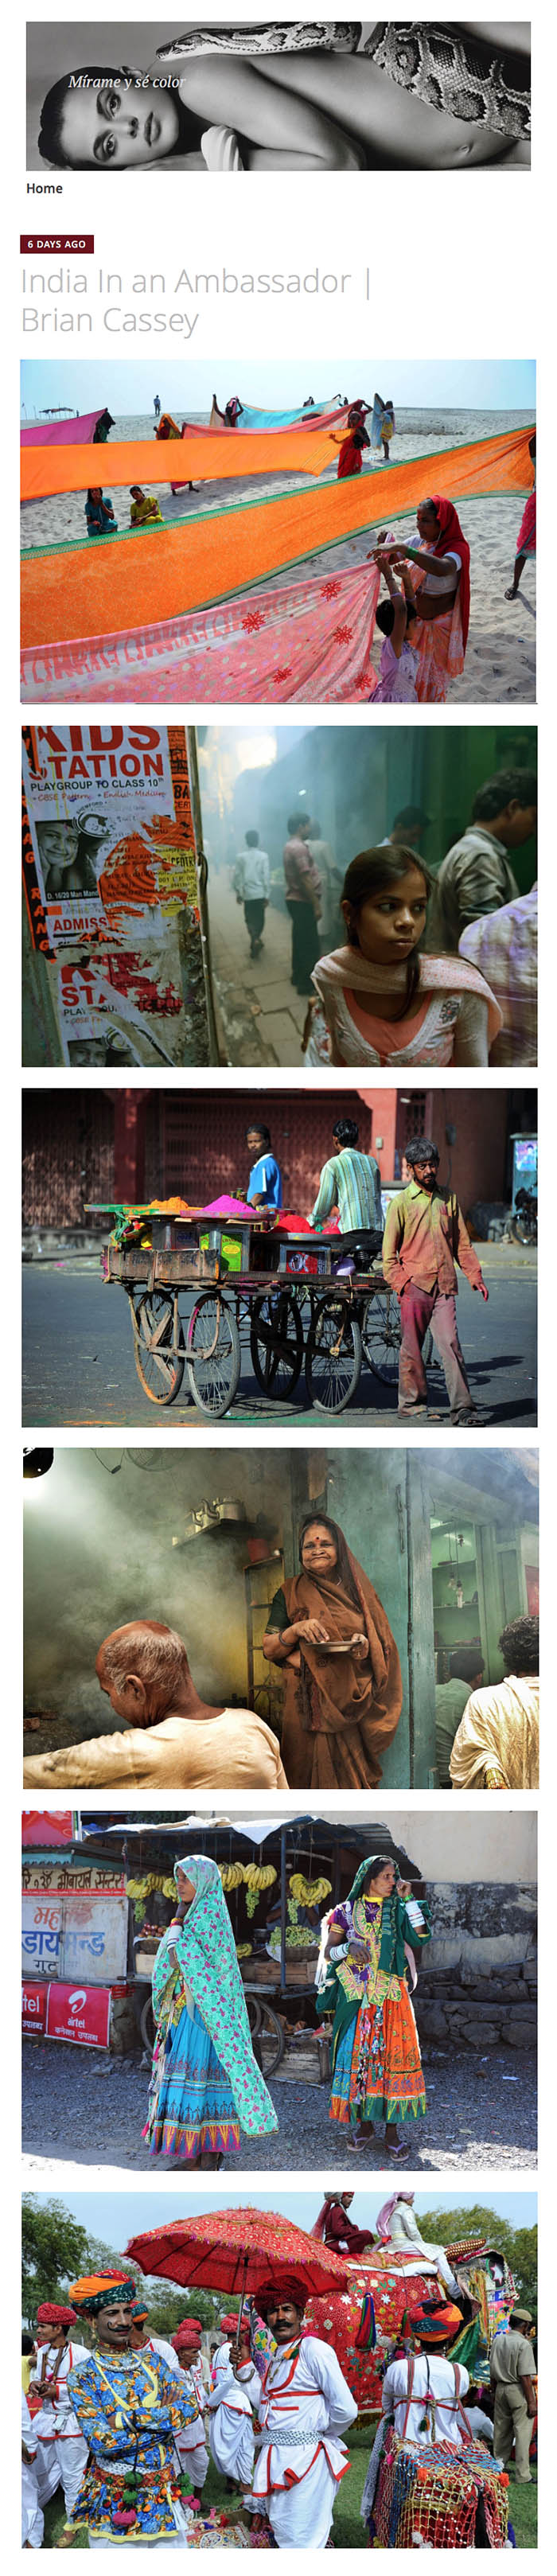 Masters of Photography - Brian Cassey - India in an Ambassador